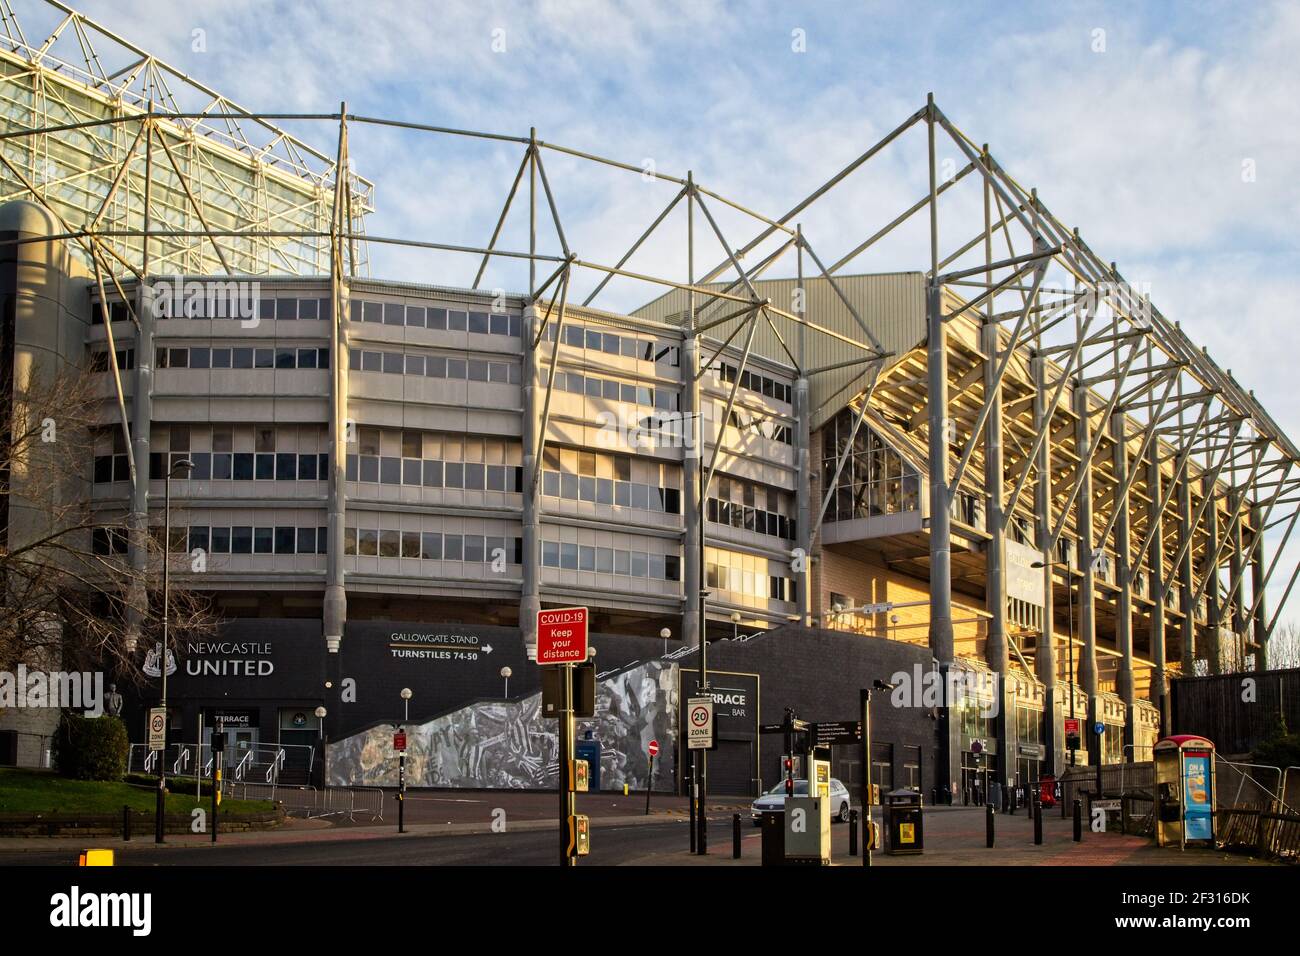 The football stadium at St James Park in Newcastle, Tyne and Wear. Home of Newcastle United Football Club.. Stock Photo